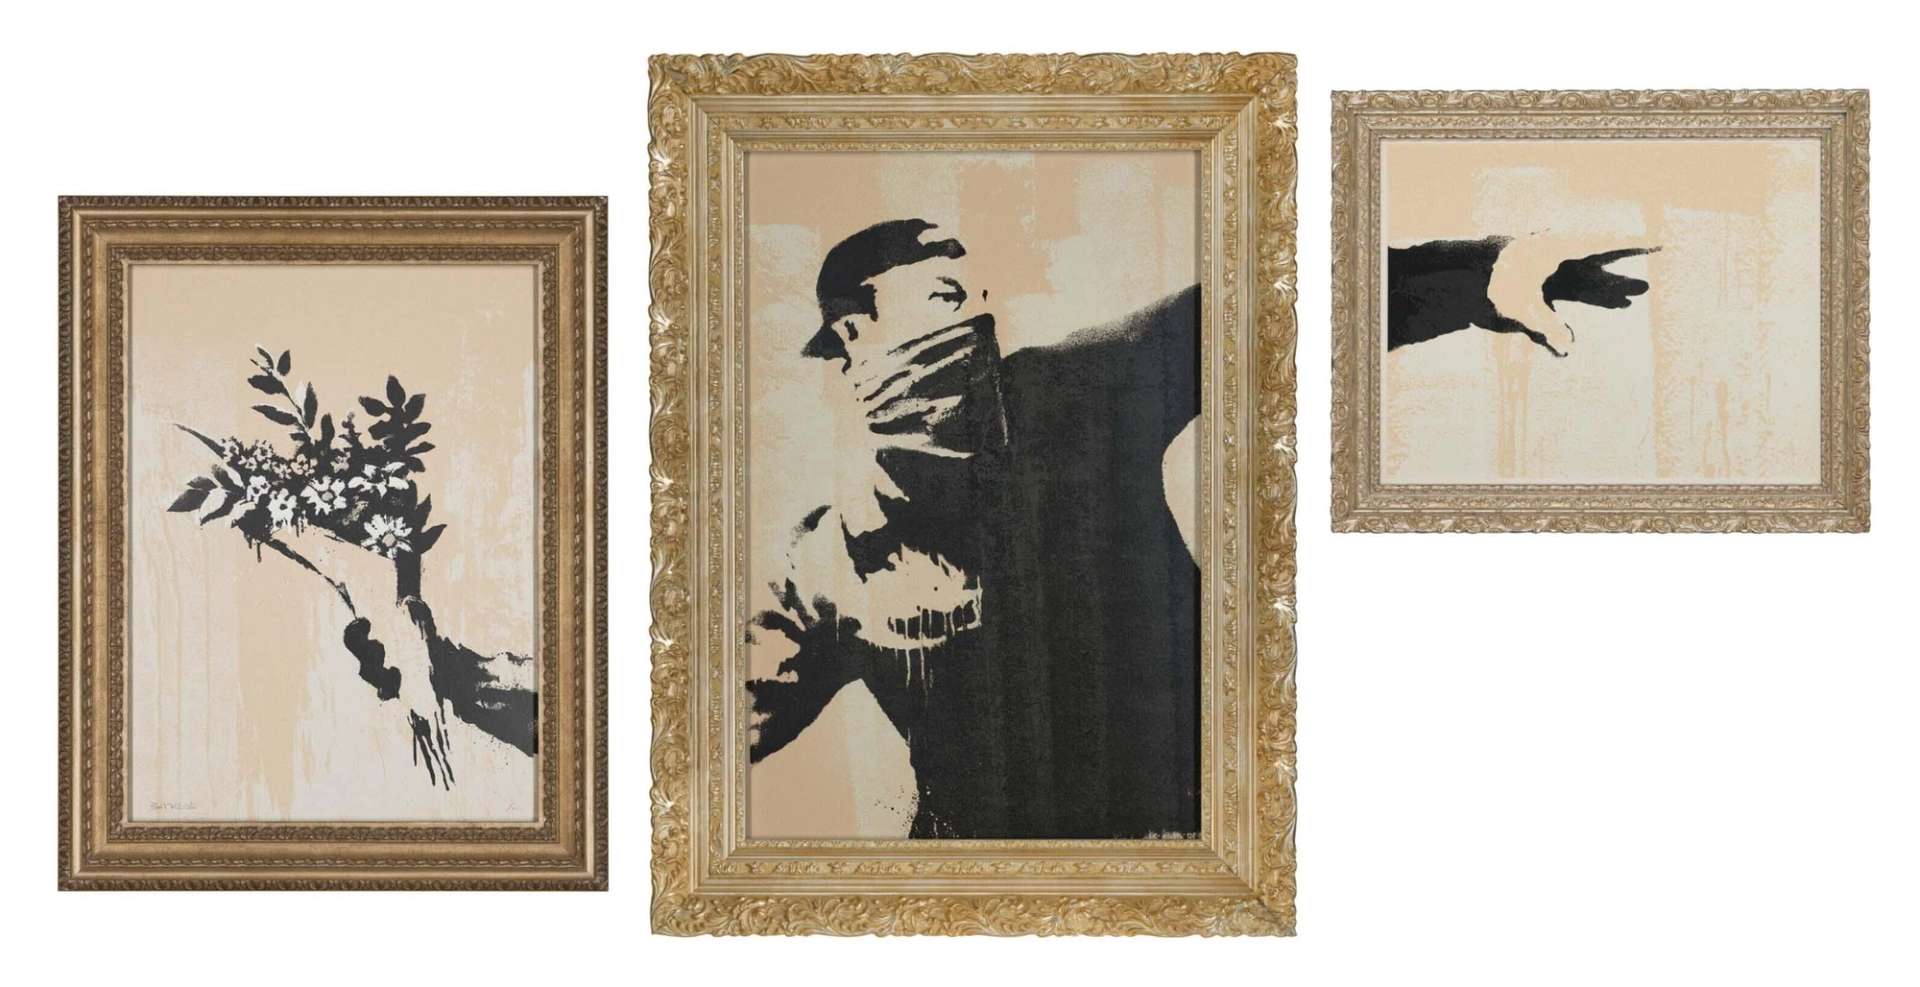 A silhouette of man throwing a bouquet, broken into three consecutive grid-like wooden frames, a commentary on war and violence.